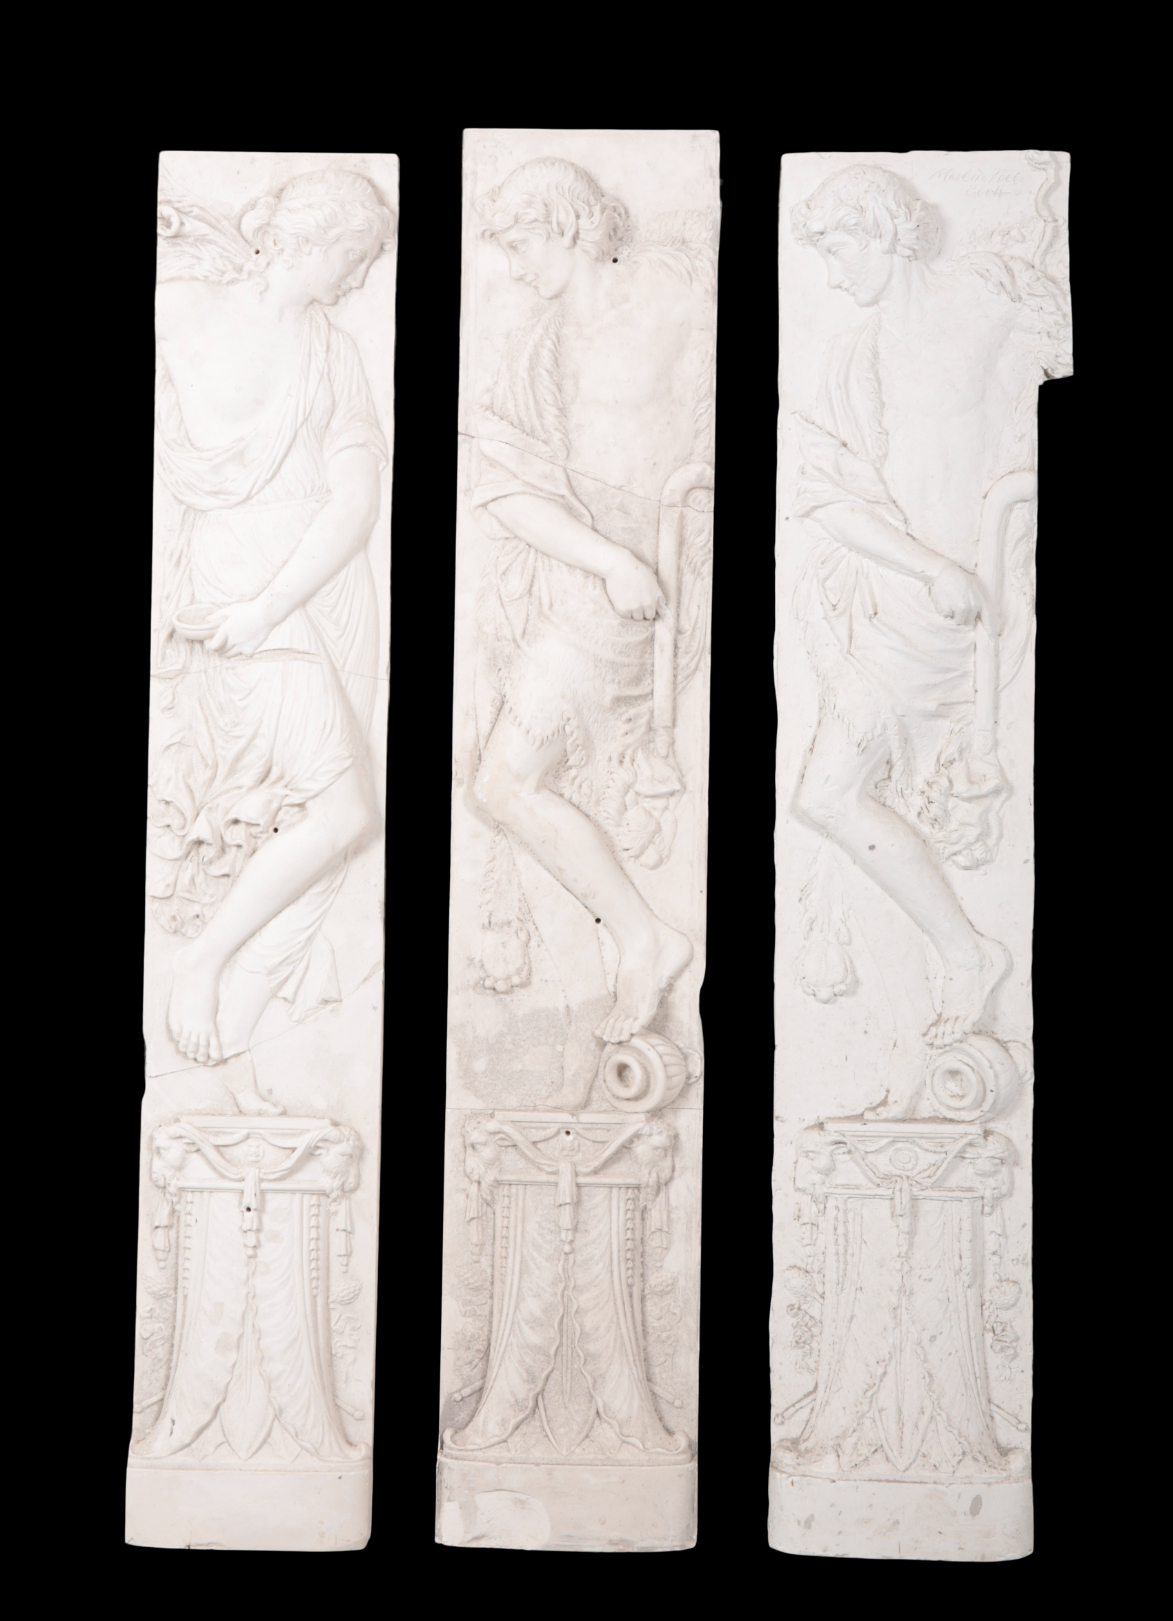 THREE LARGE PLASTER RELIEFS OF